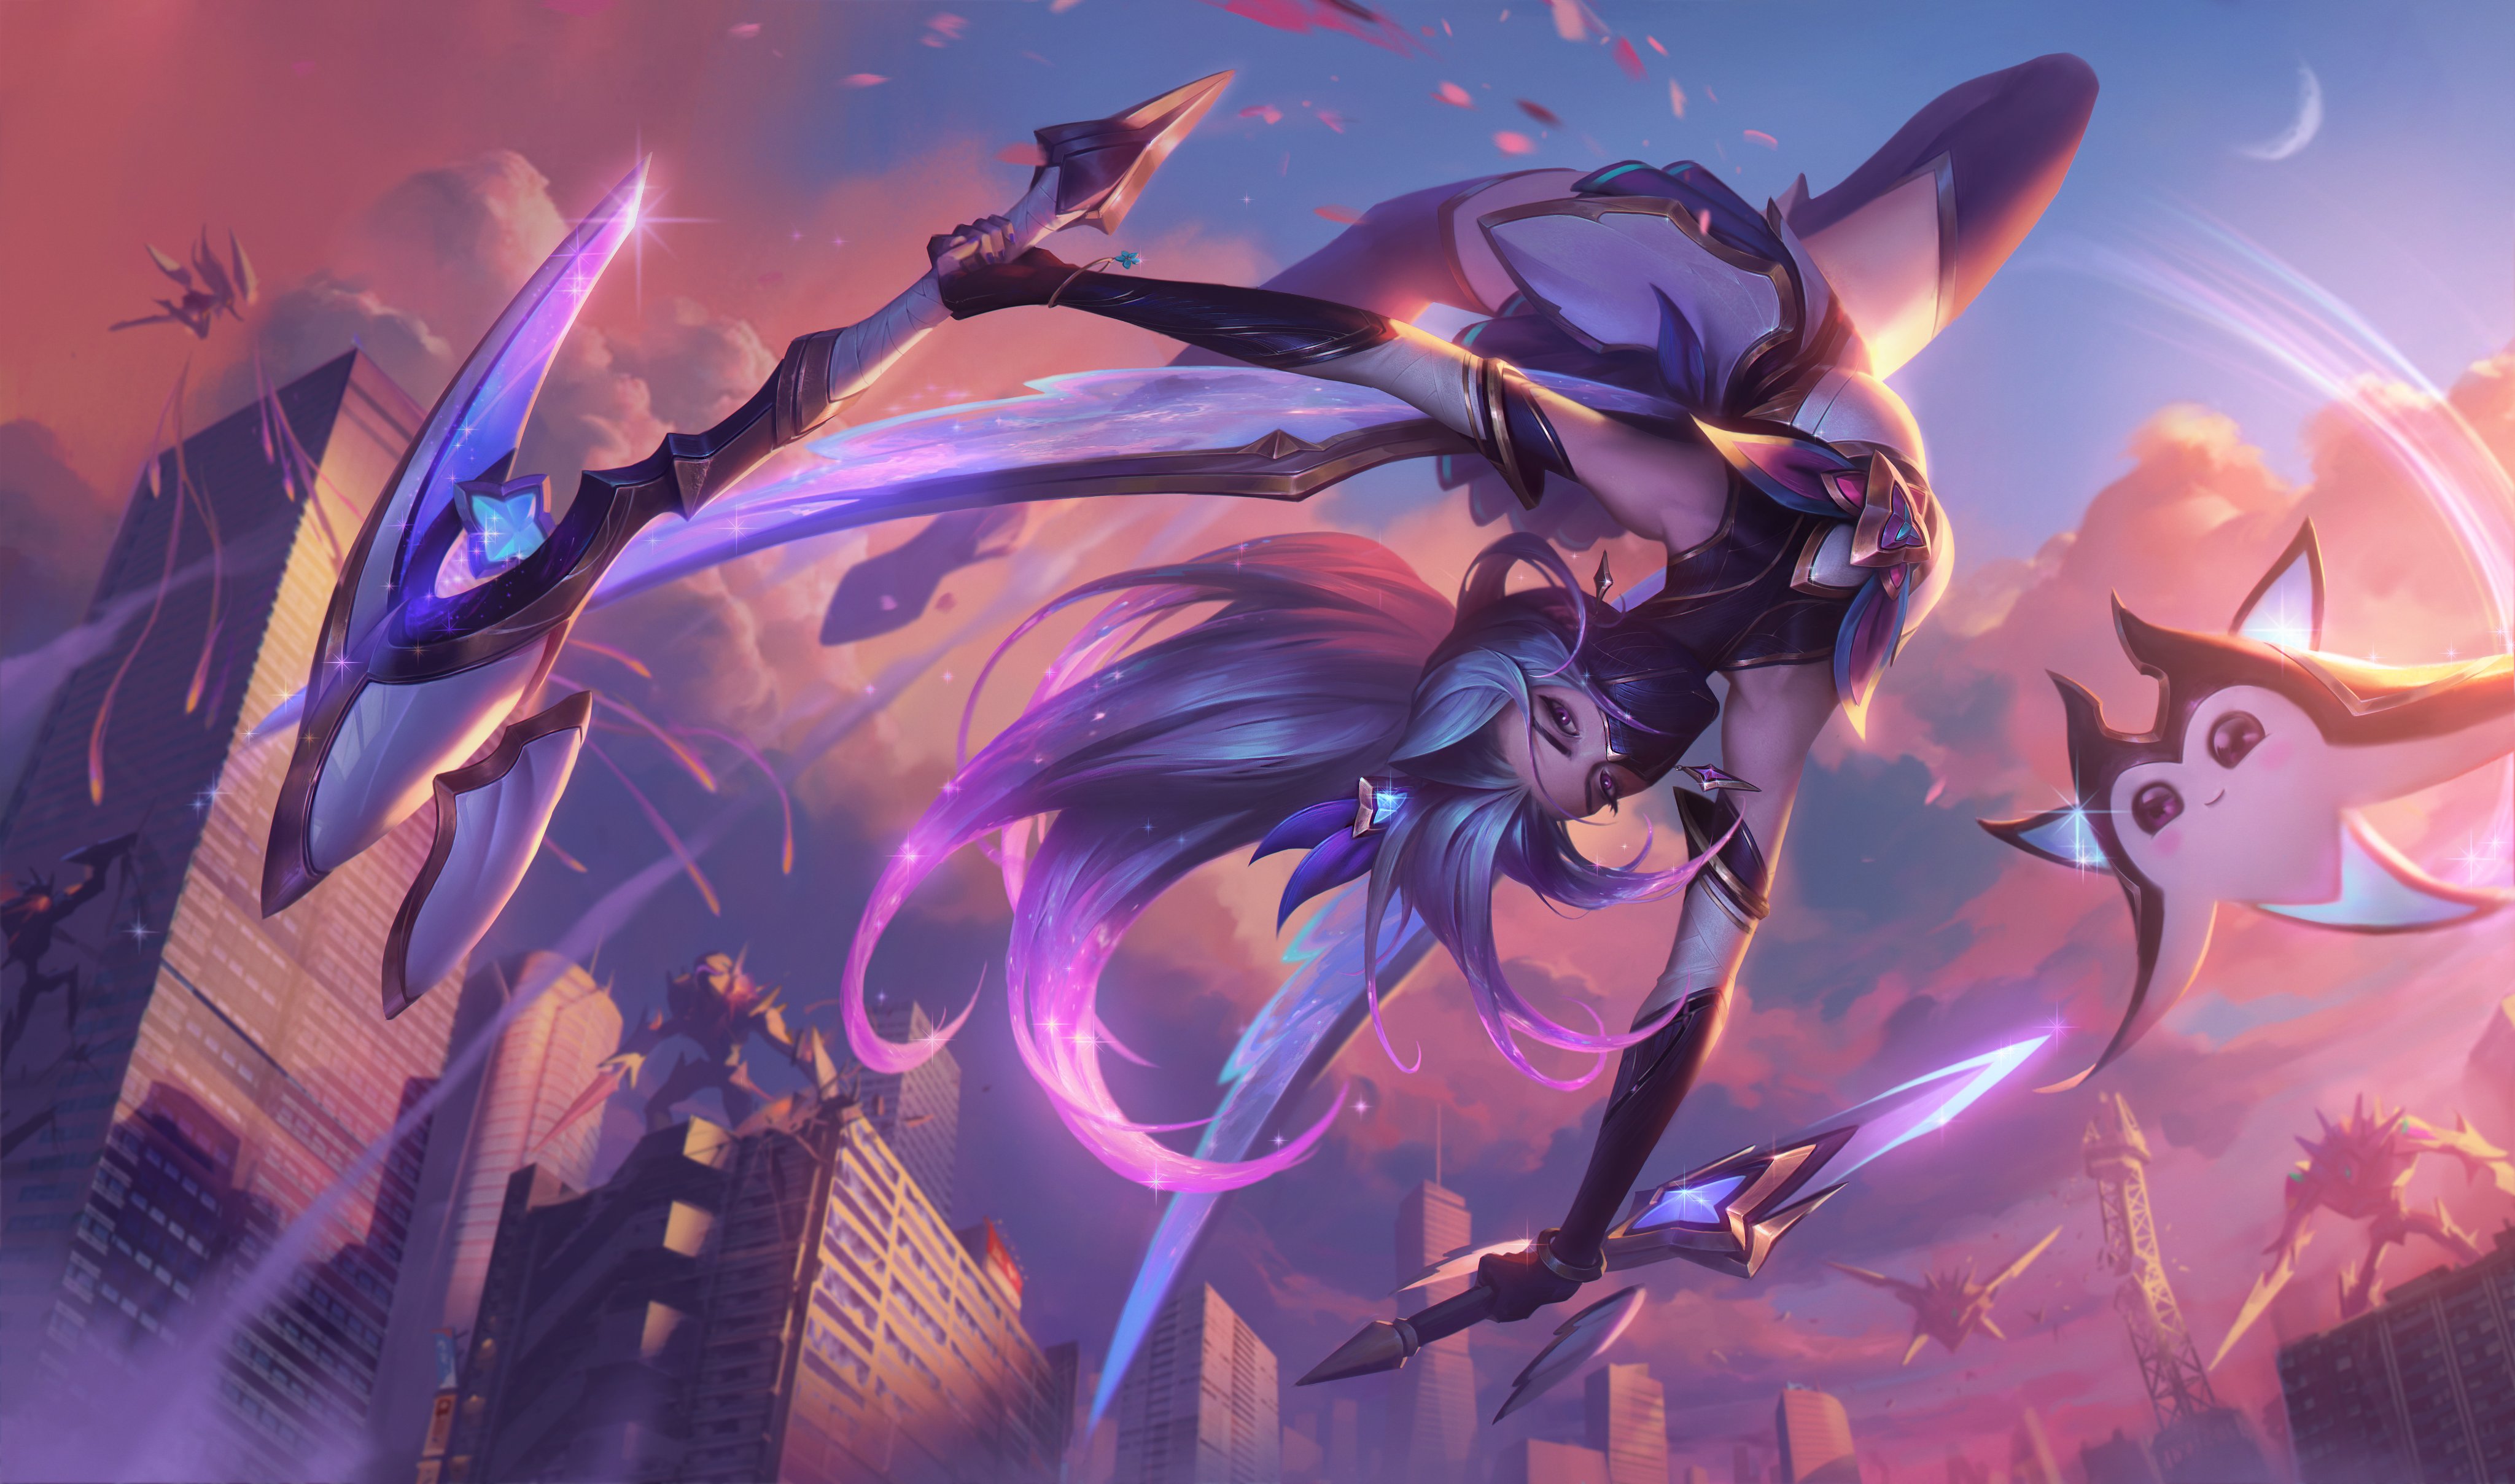 League of Legends splash art, showing Star Guardian Akali do a flip in the air while fighting off monsters.